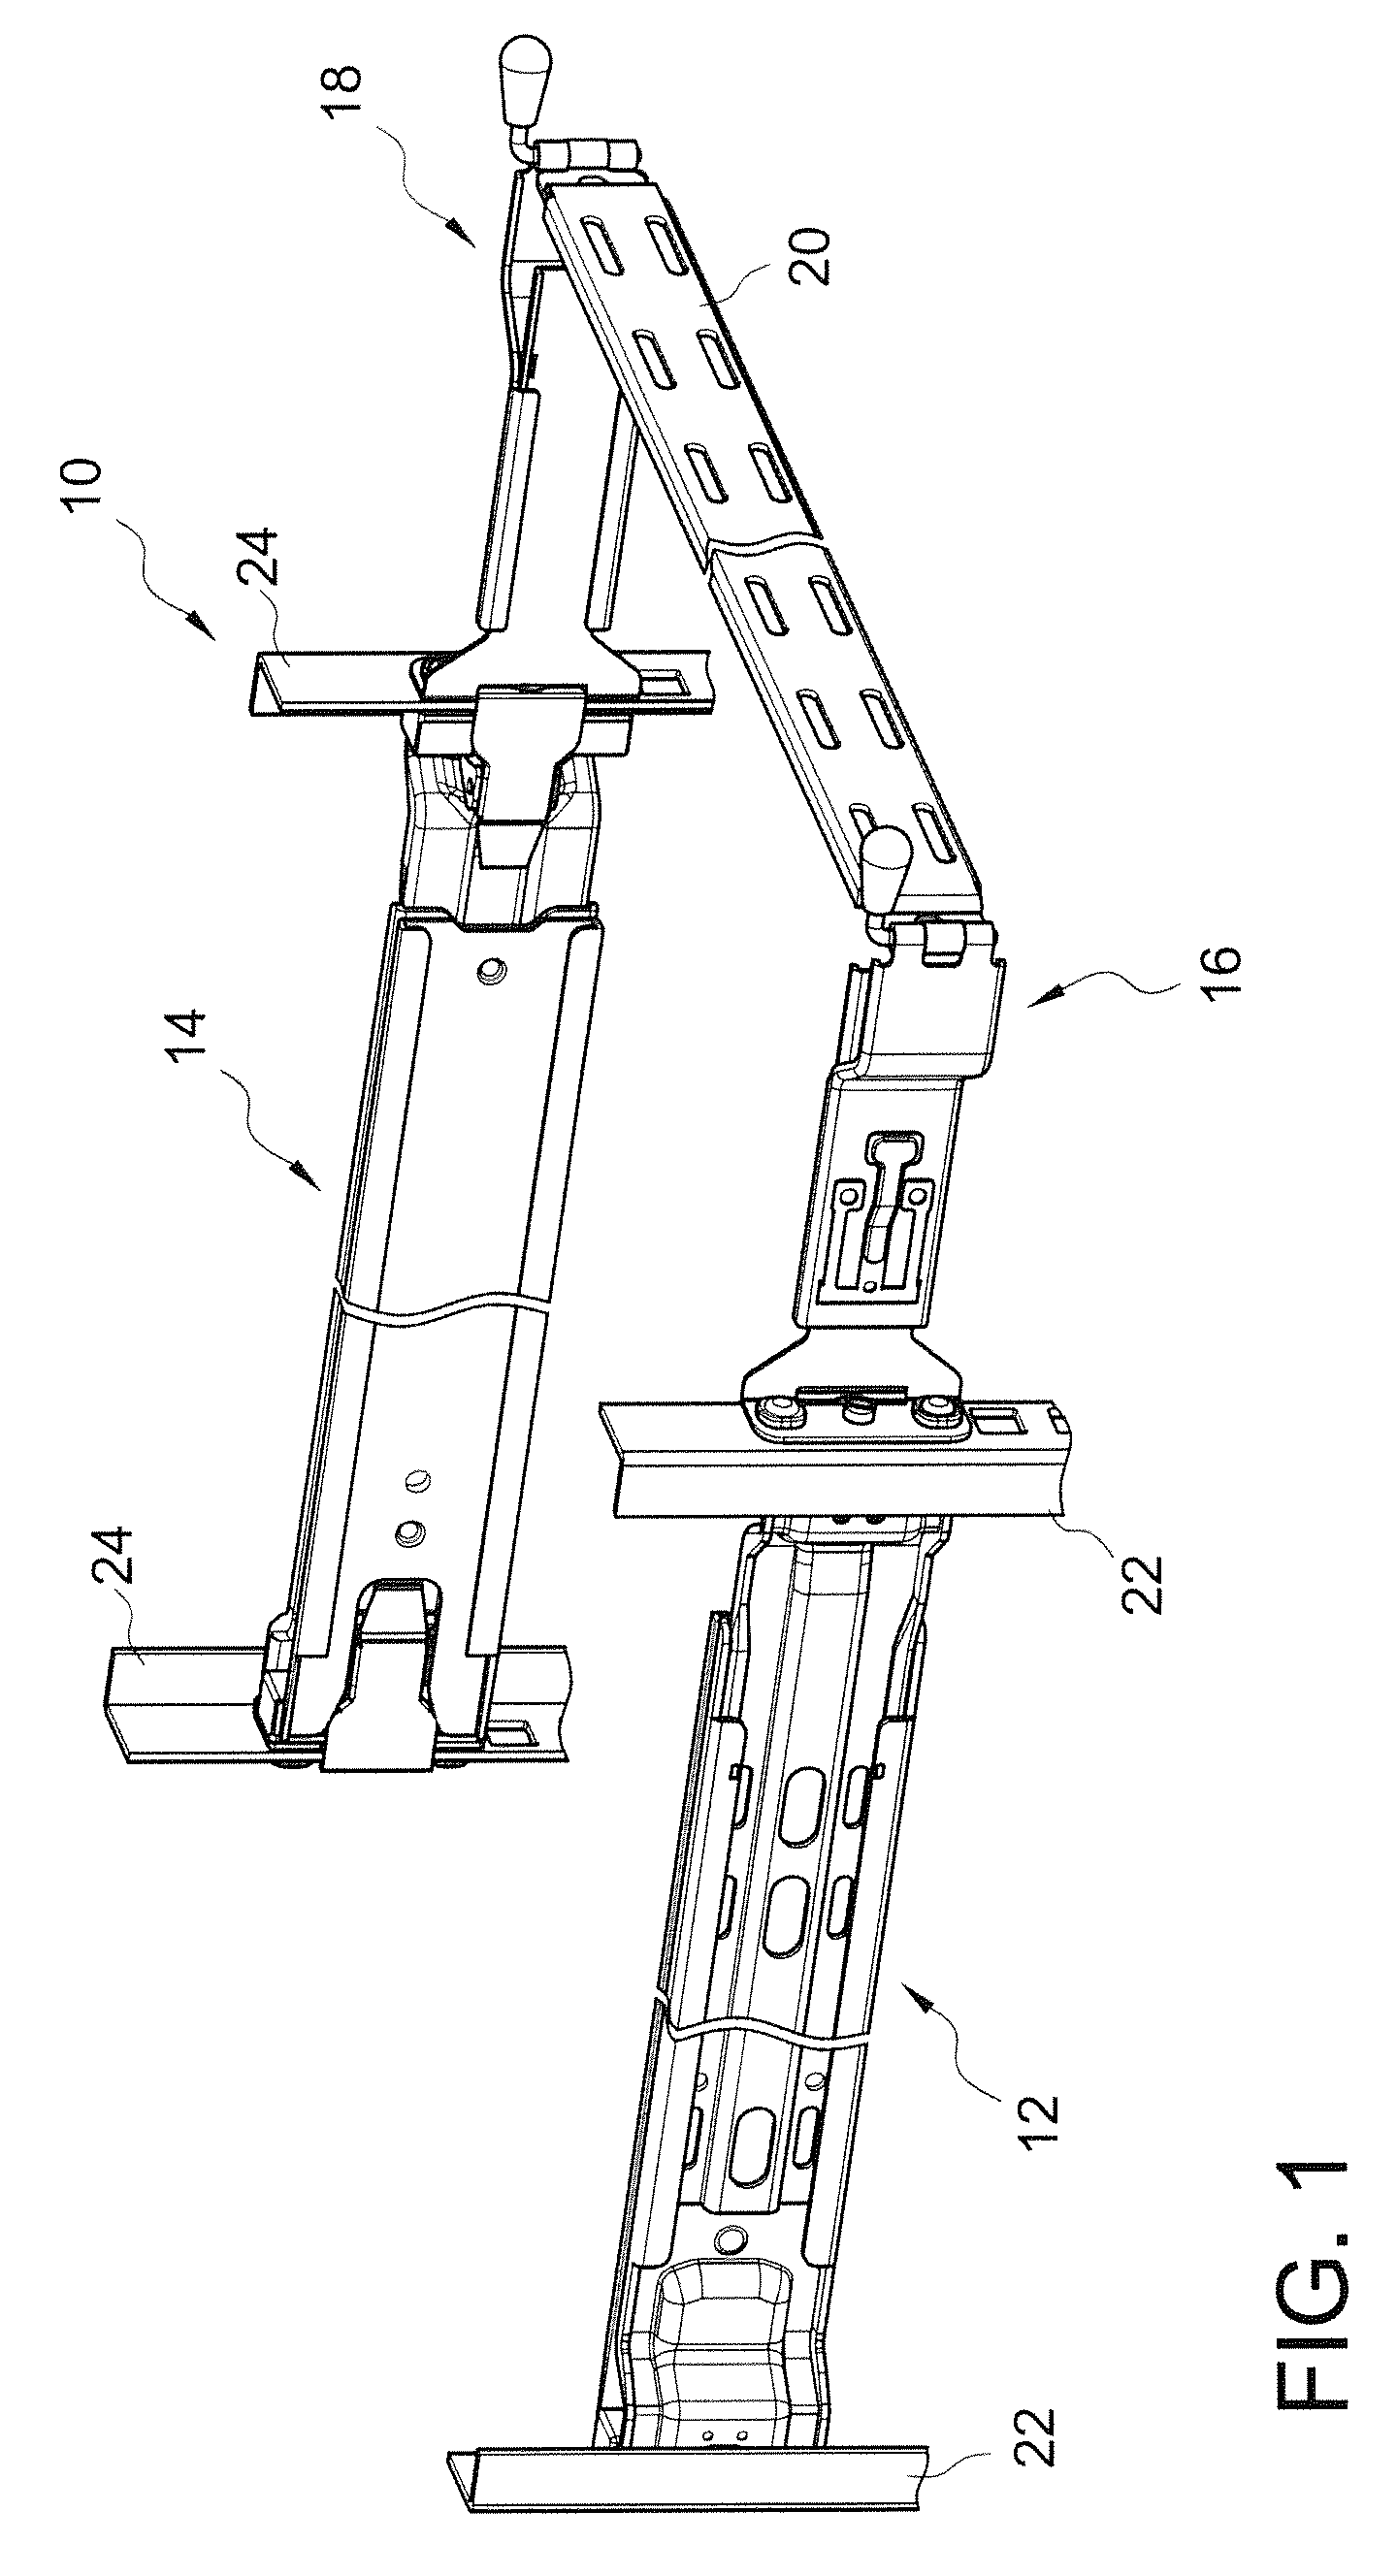 Adjustment device for cable management arm